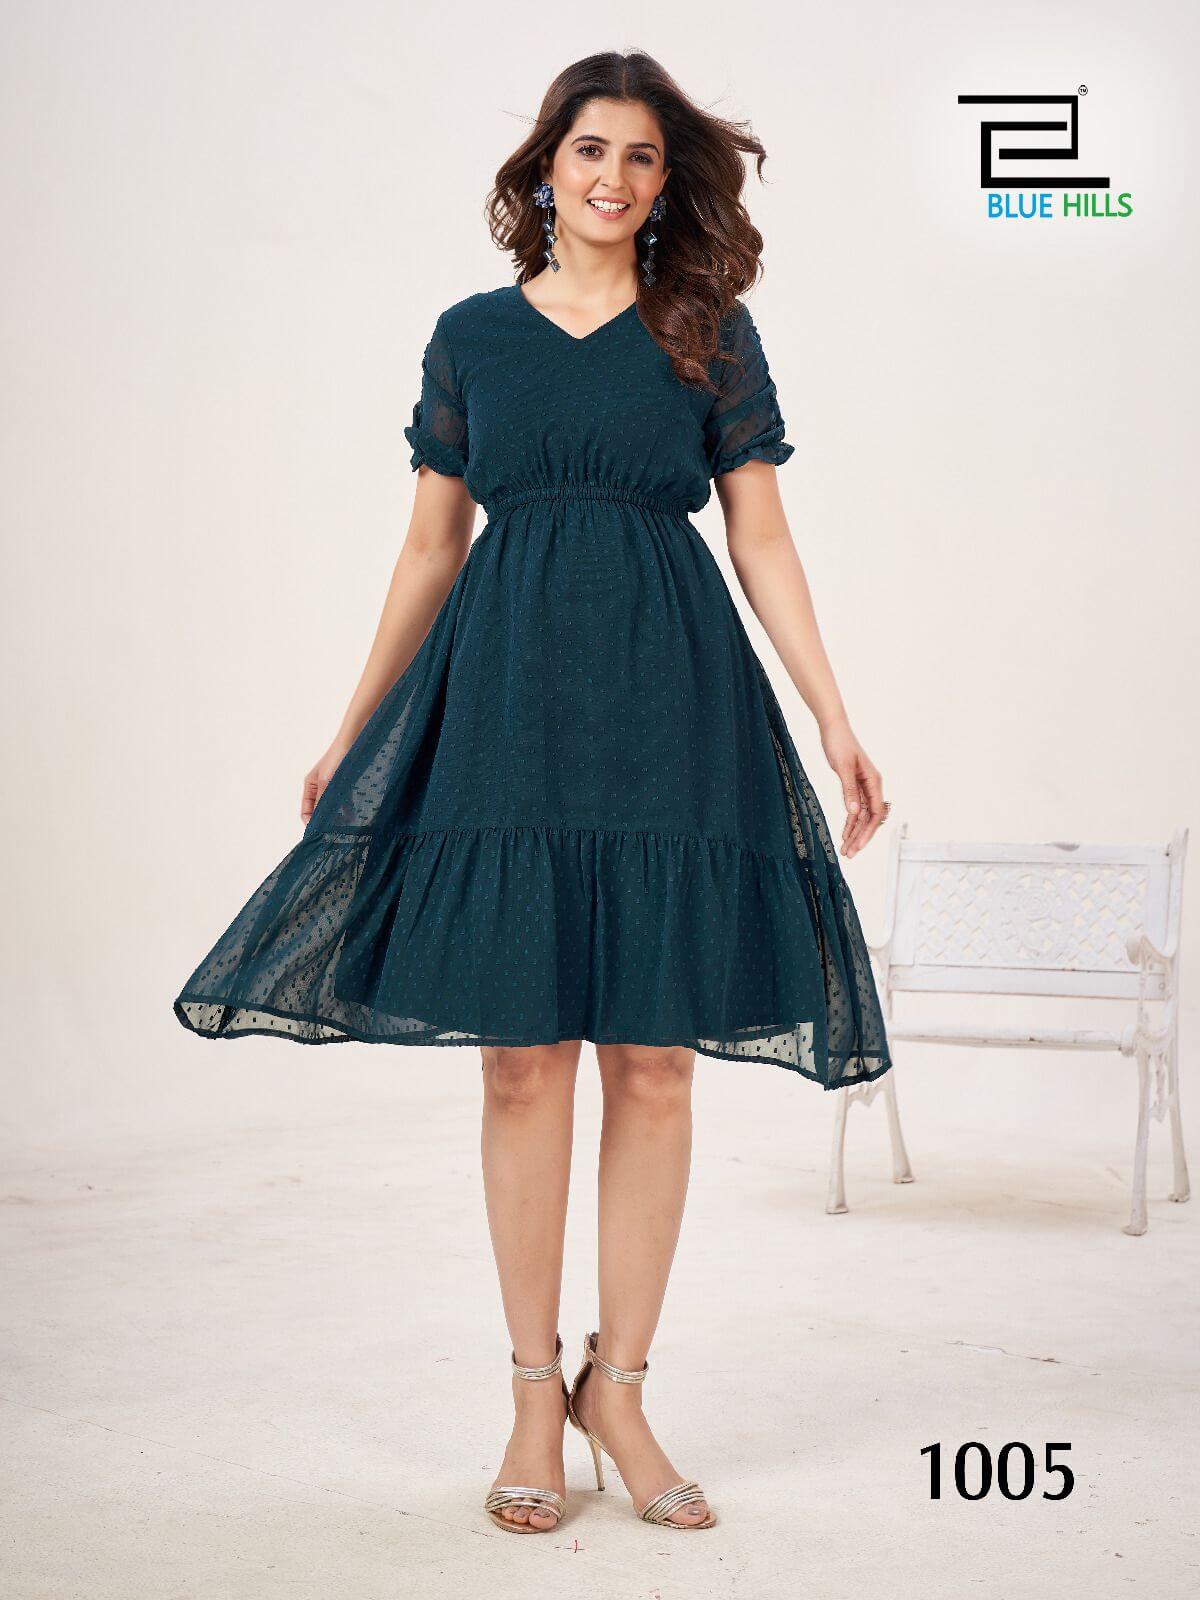 Blue Hills Charming One Piece Dress Catalog collection 9